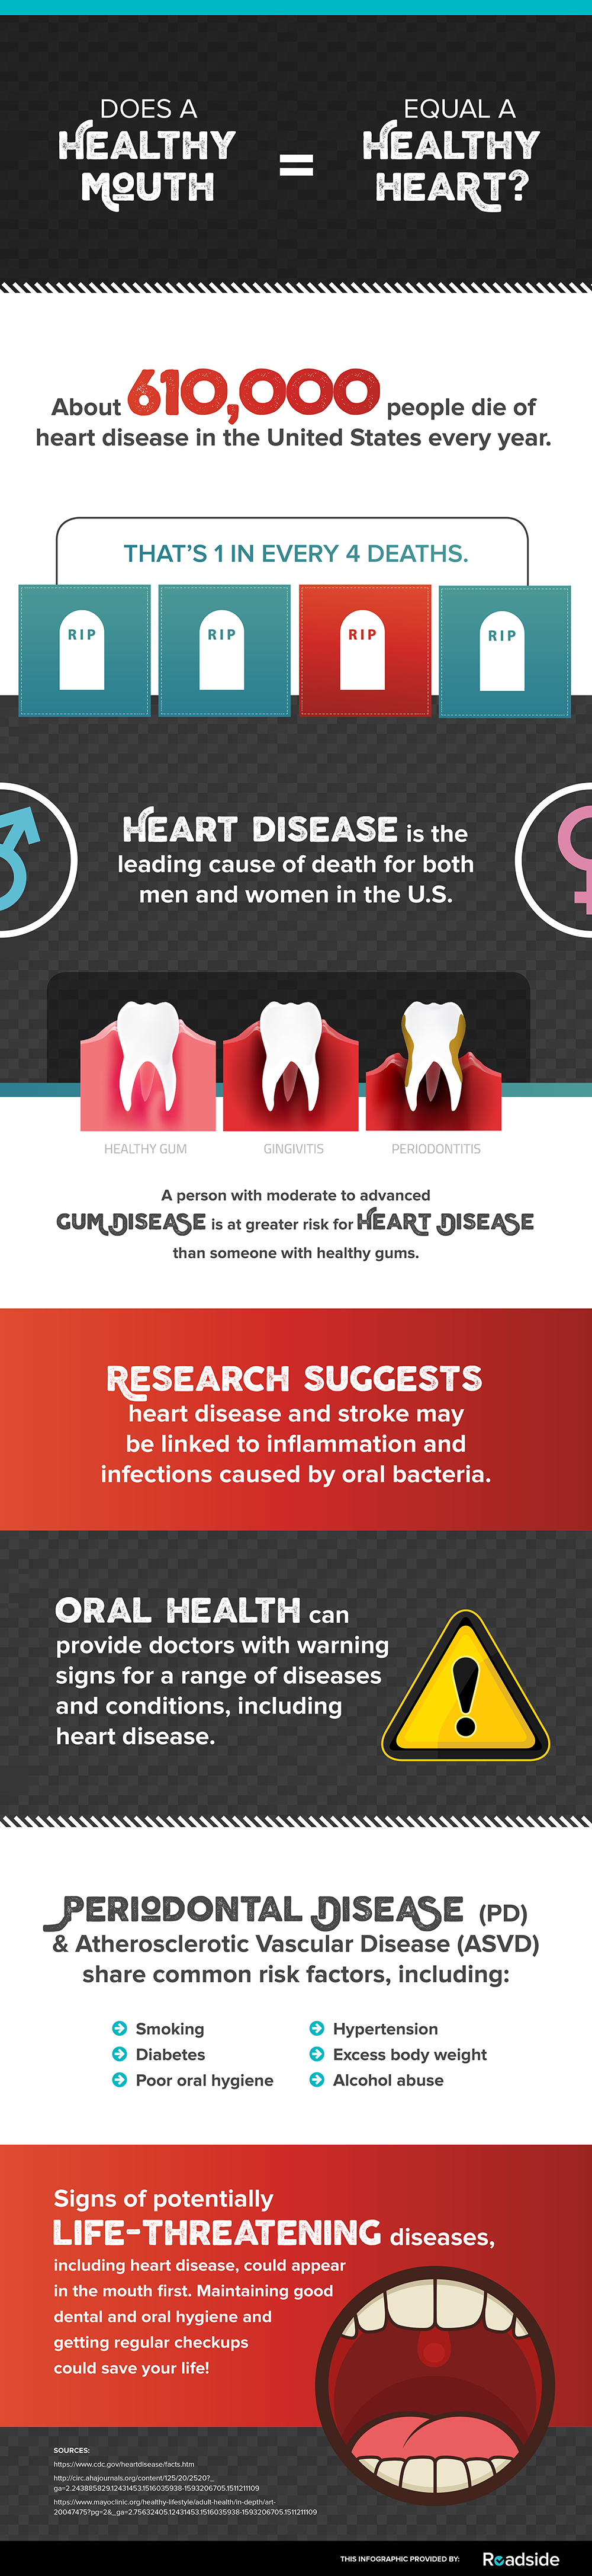 Learn the connections between a healthy mouth and healthy heart in this infographic.